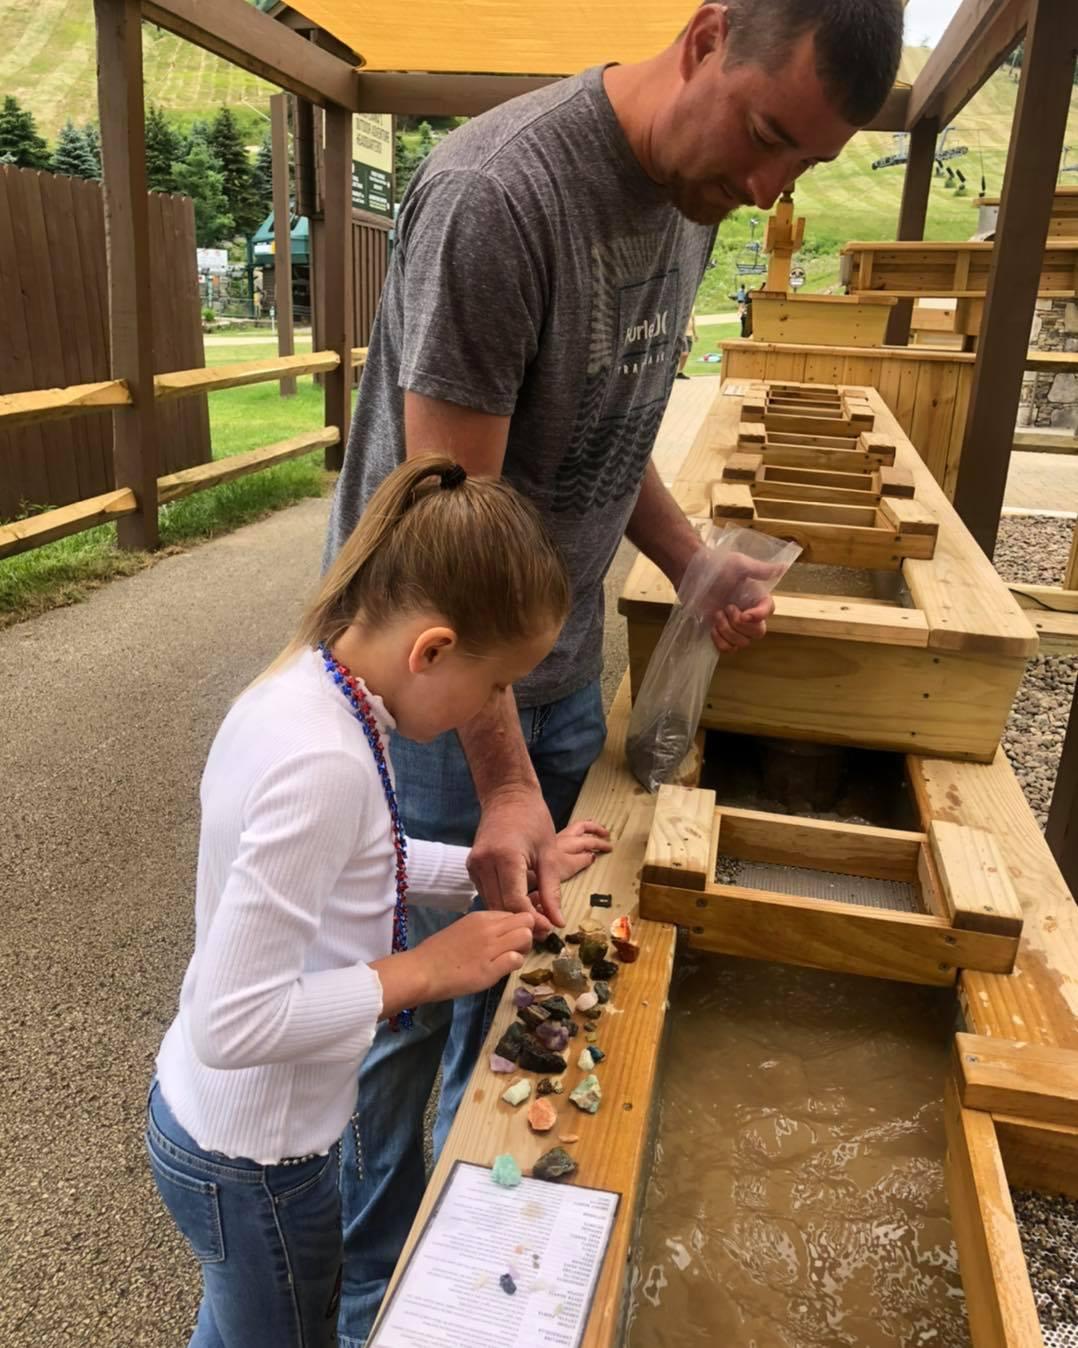 A father and daughter enjoy gem mining by sifting and shaking a tray in a sluice box with water to reveal various colorful treasures. (Courtesy of Seven Springs)